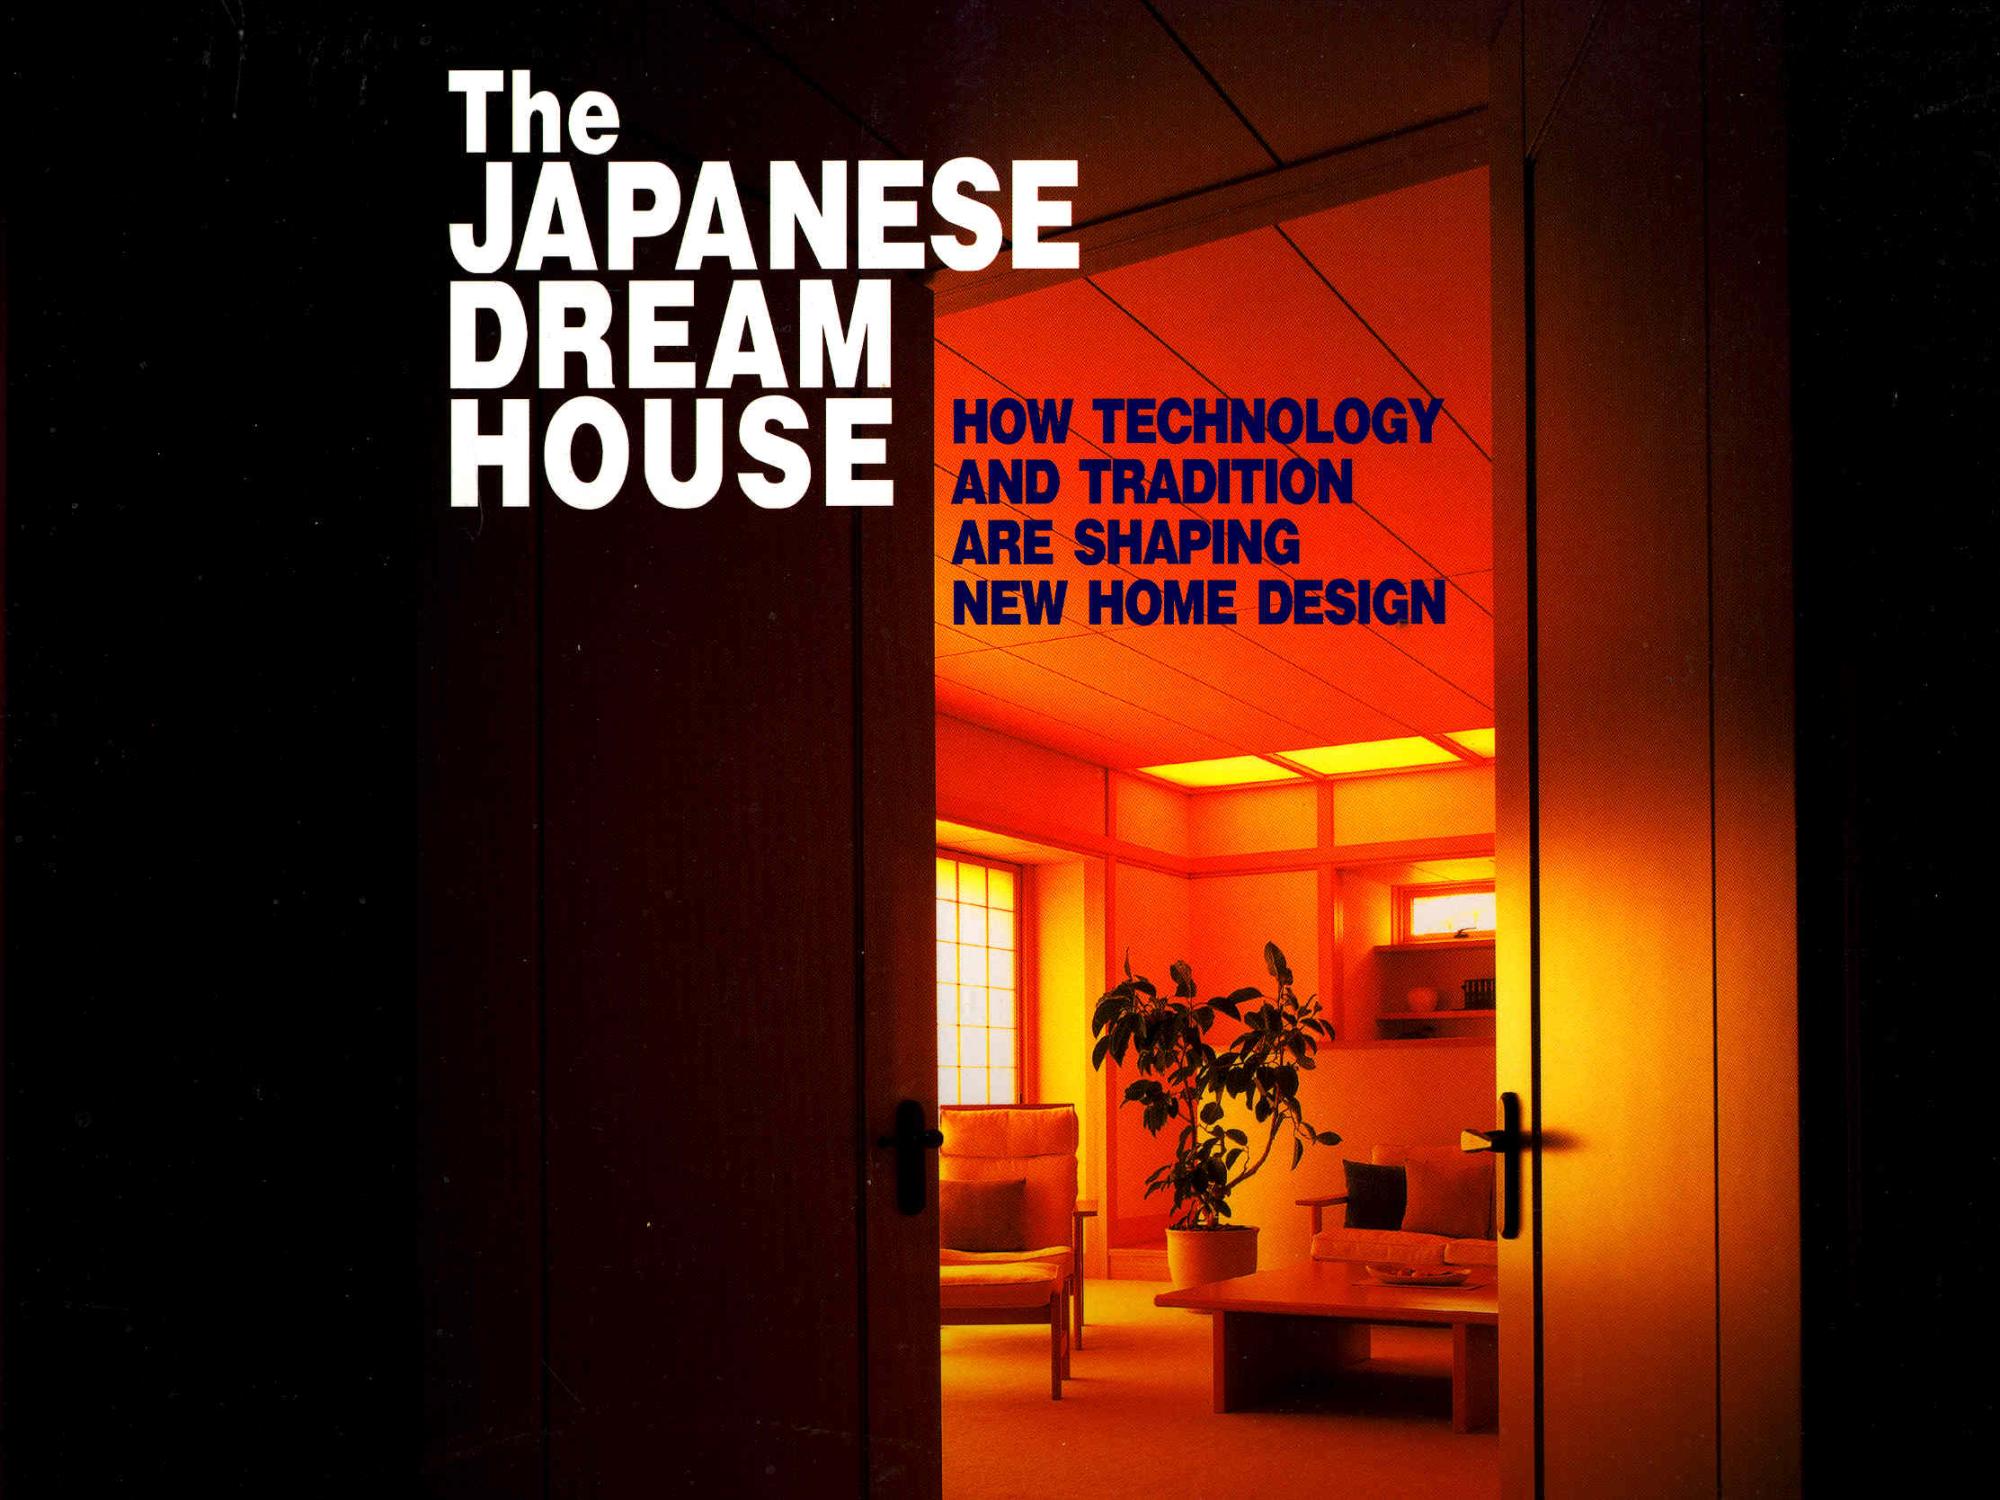 The Japanese Dream House How Technology And Tradition Are Shaping New Home Design A N E Y º E E Y A I Yapanisu Toriimu Hausu By Brown